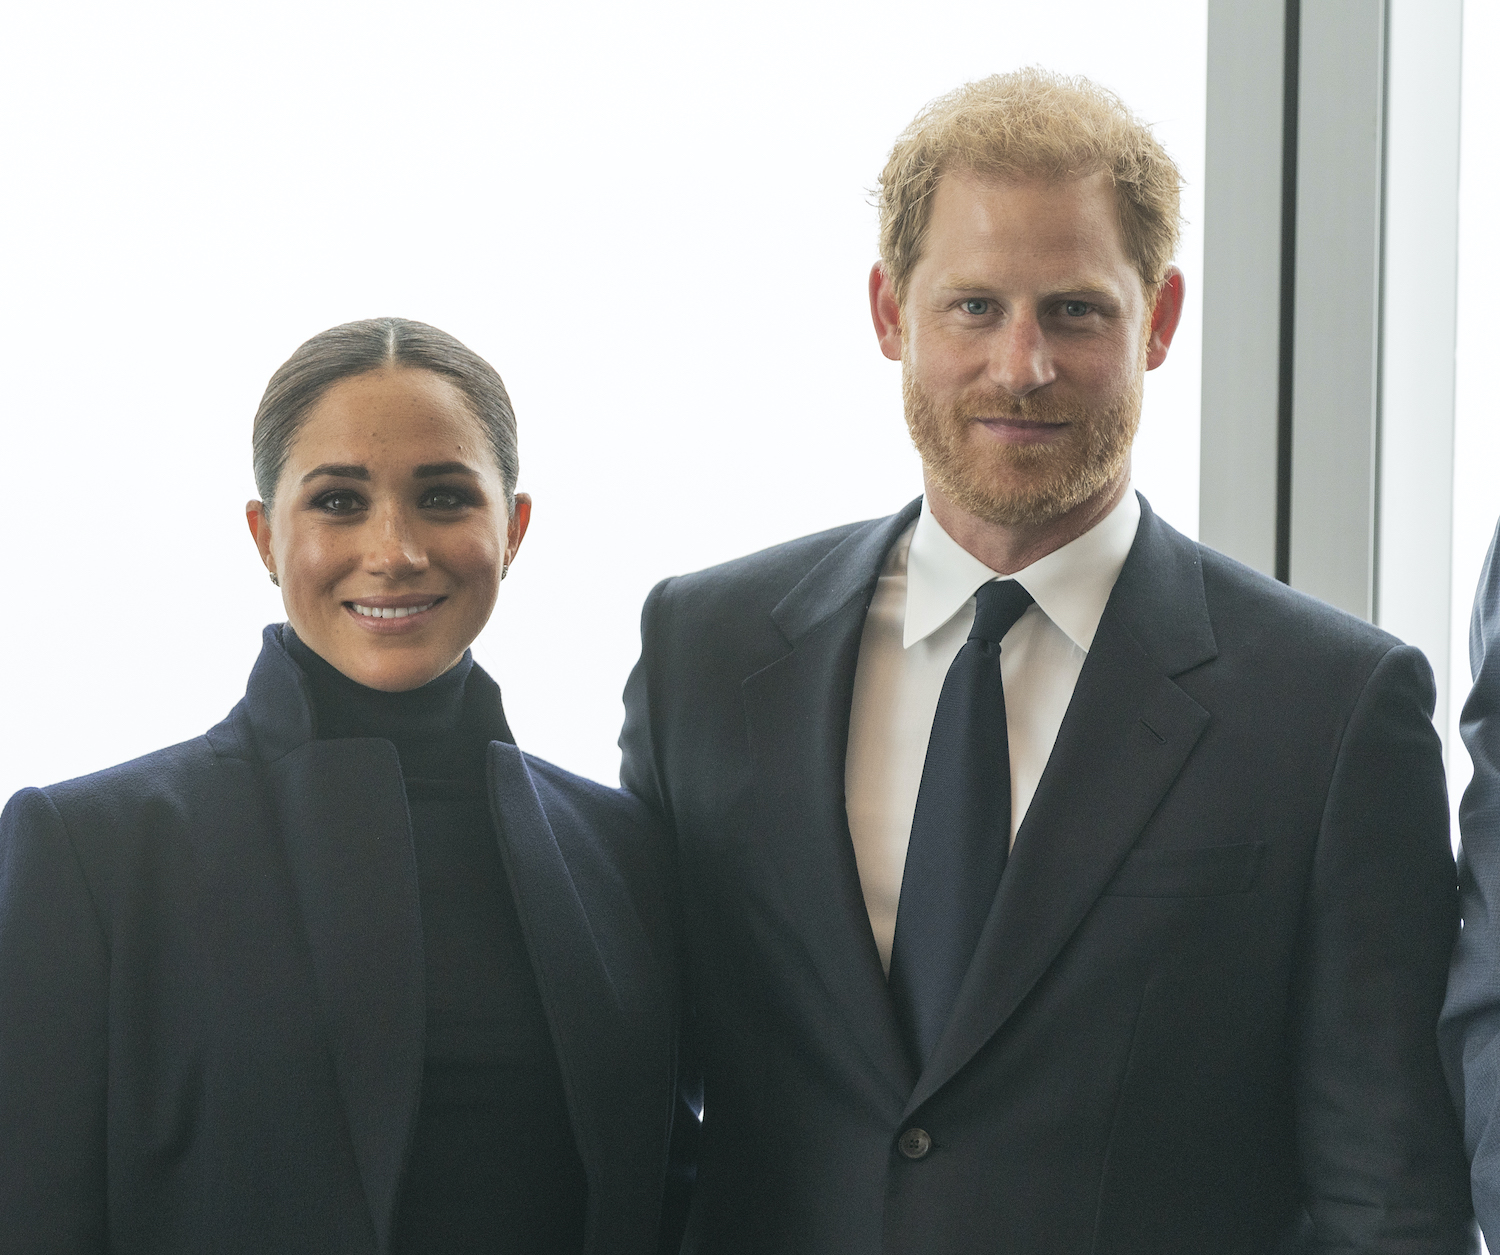 Prince Harry and Meghan Markle both dressed in black, pose while visiting One World Observatory of Freedom Tower of World Trade Center